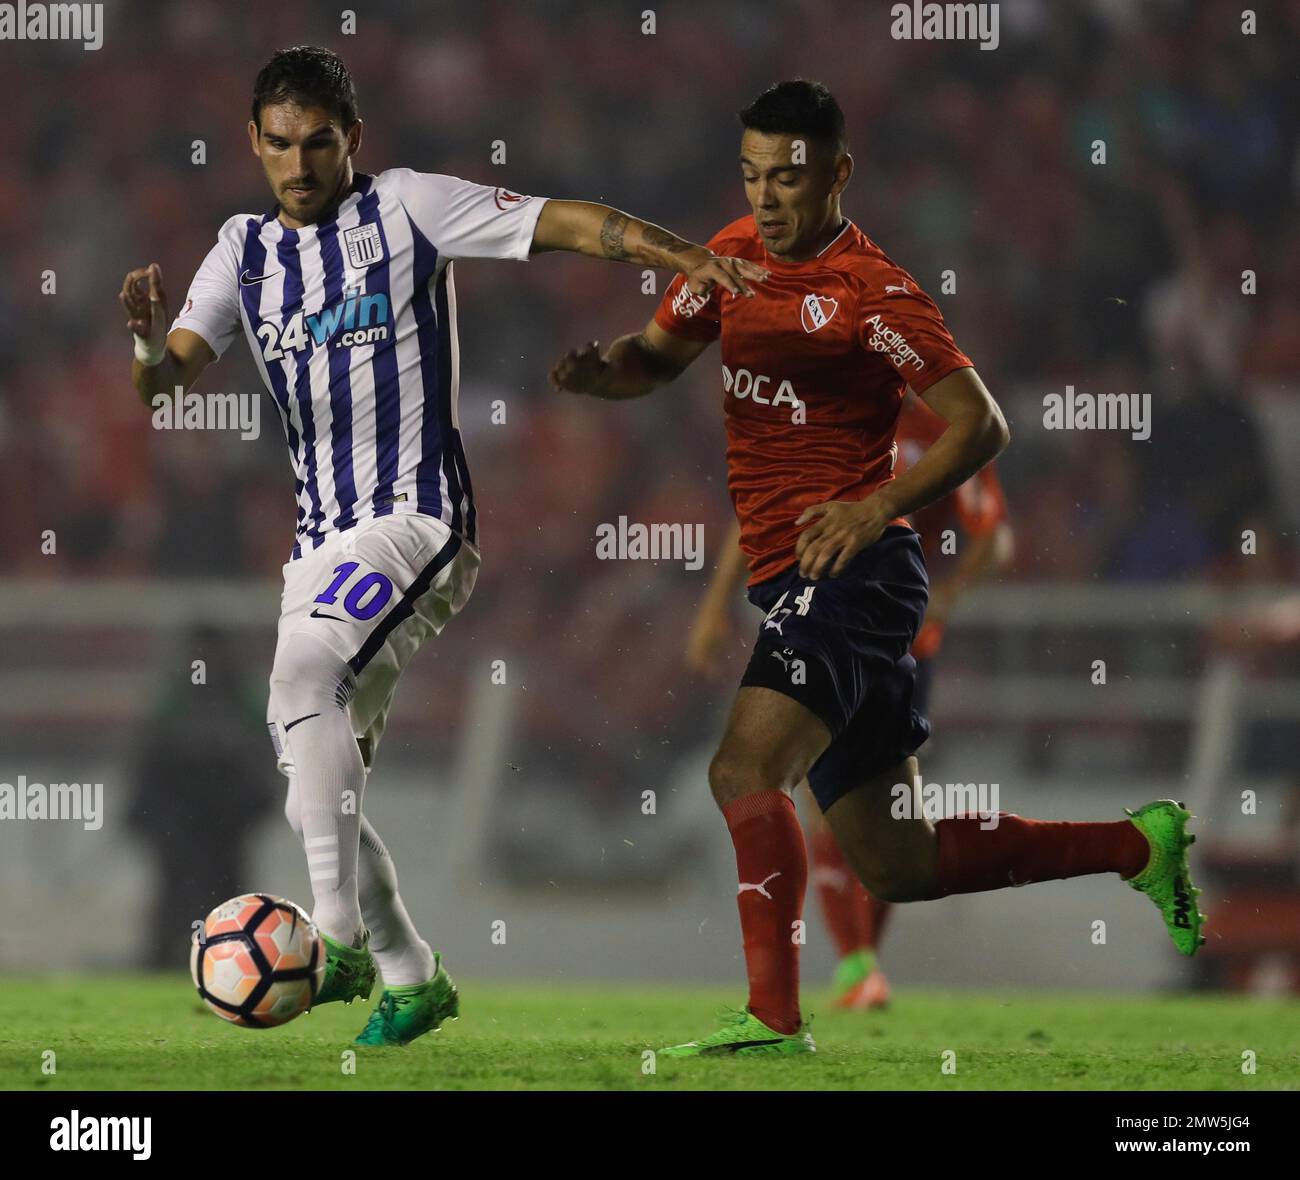 German Pacheco of Peru's Alianza Lima, left, fights for the ball with Nery Dominguez of Argentina's Independiente during a Copa Sudamericana soccer match in Buenos Aires, Argentina, Tuesday, April 4, 2017.(AP Photo/Natacha Pisarenko) Stock Photo